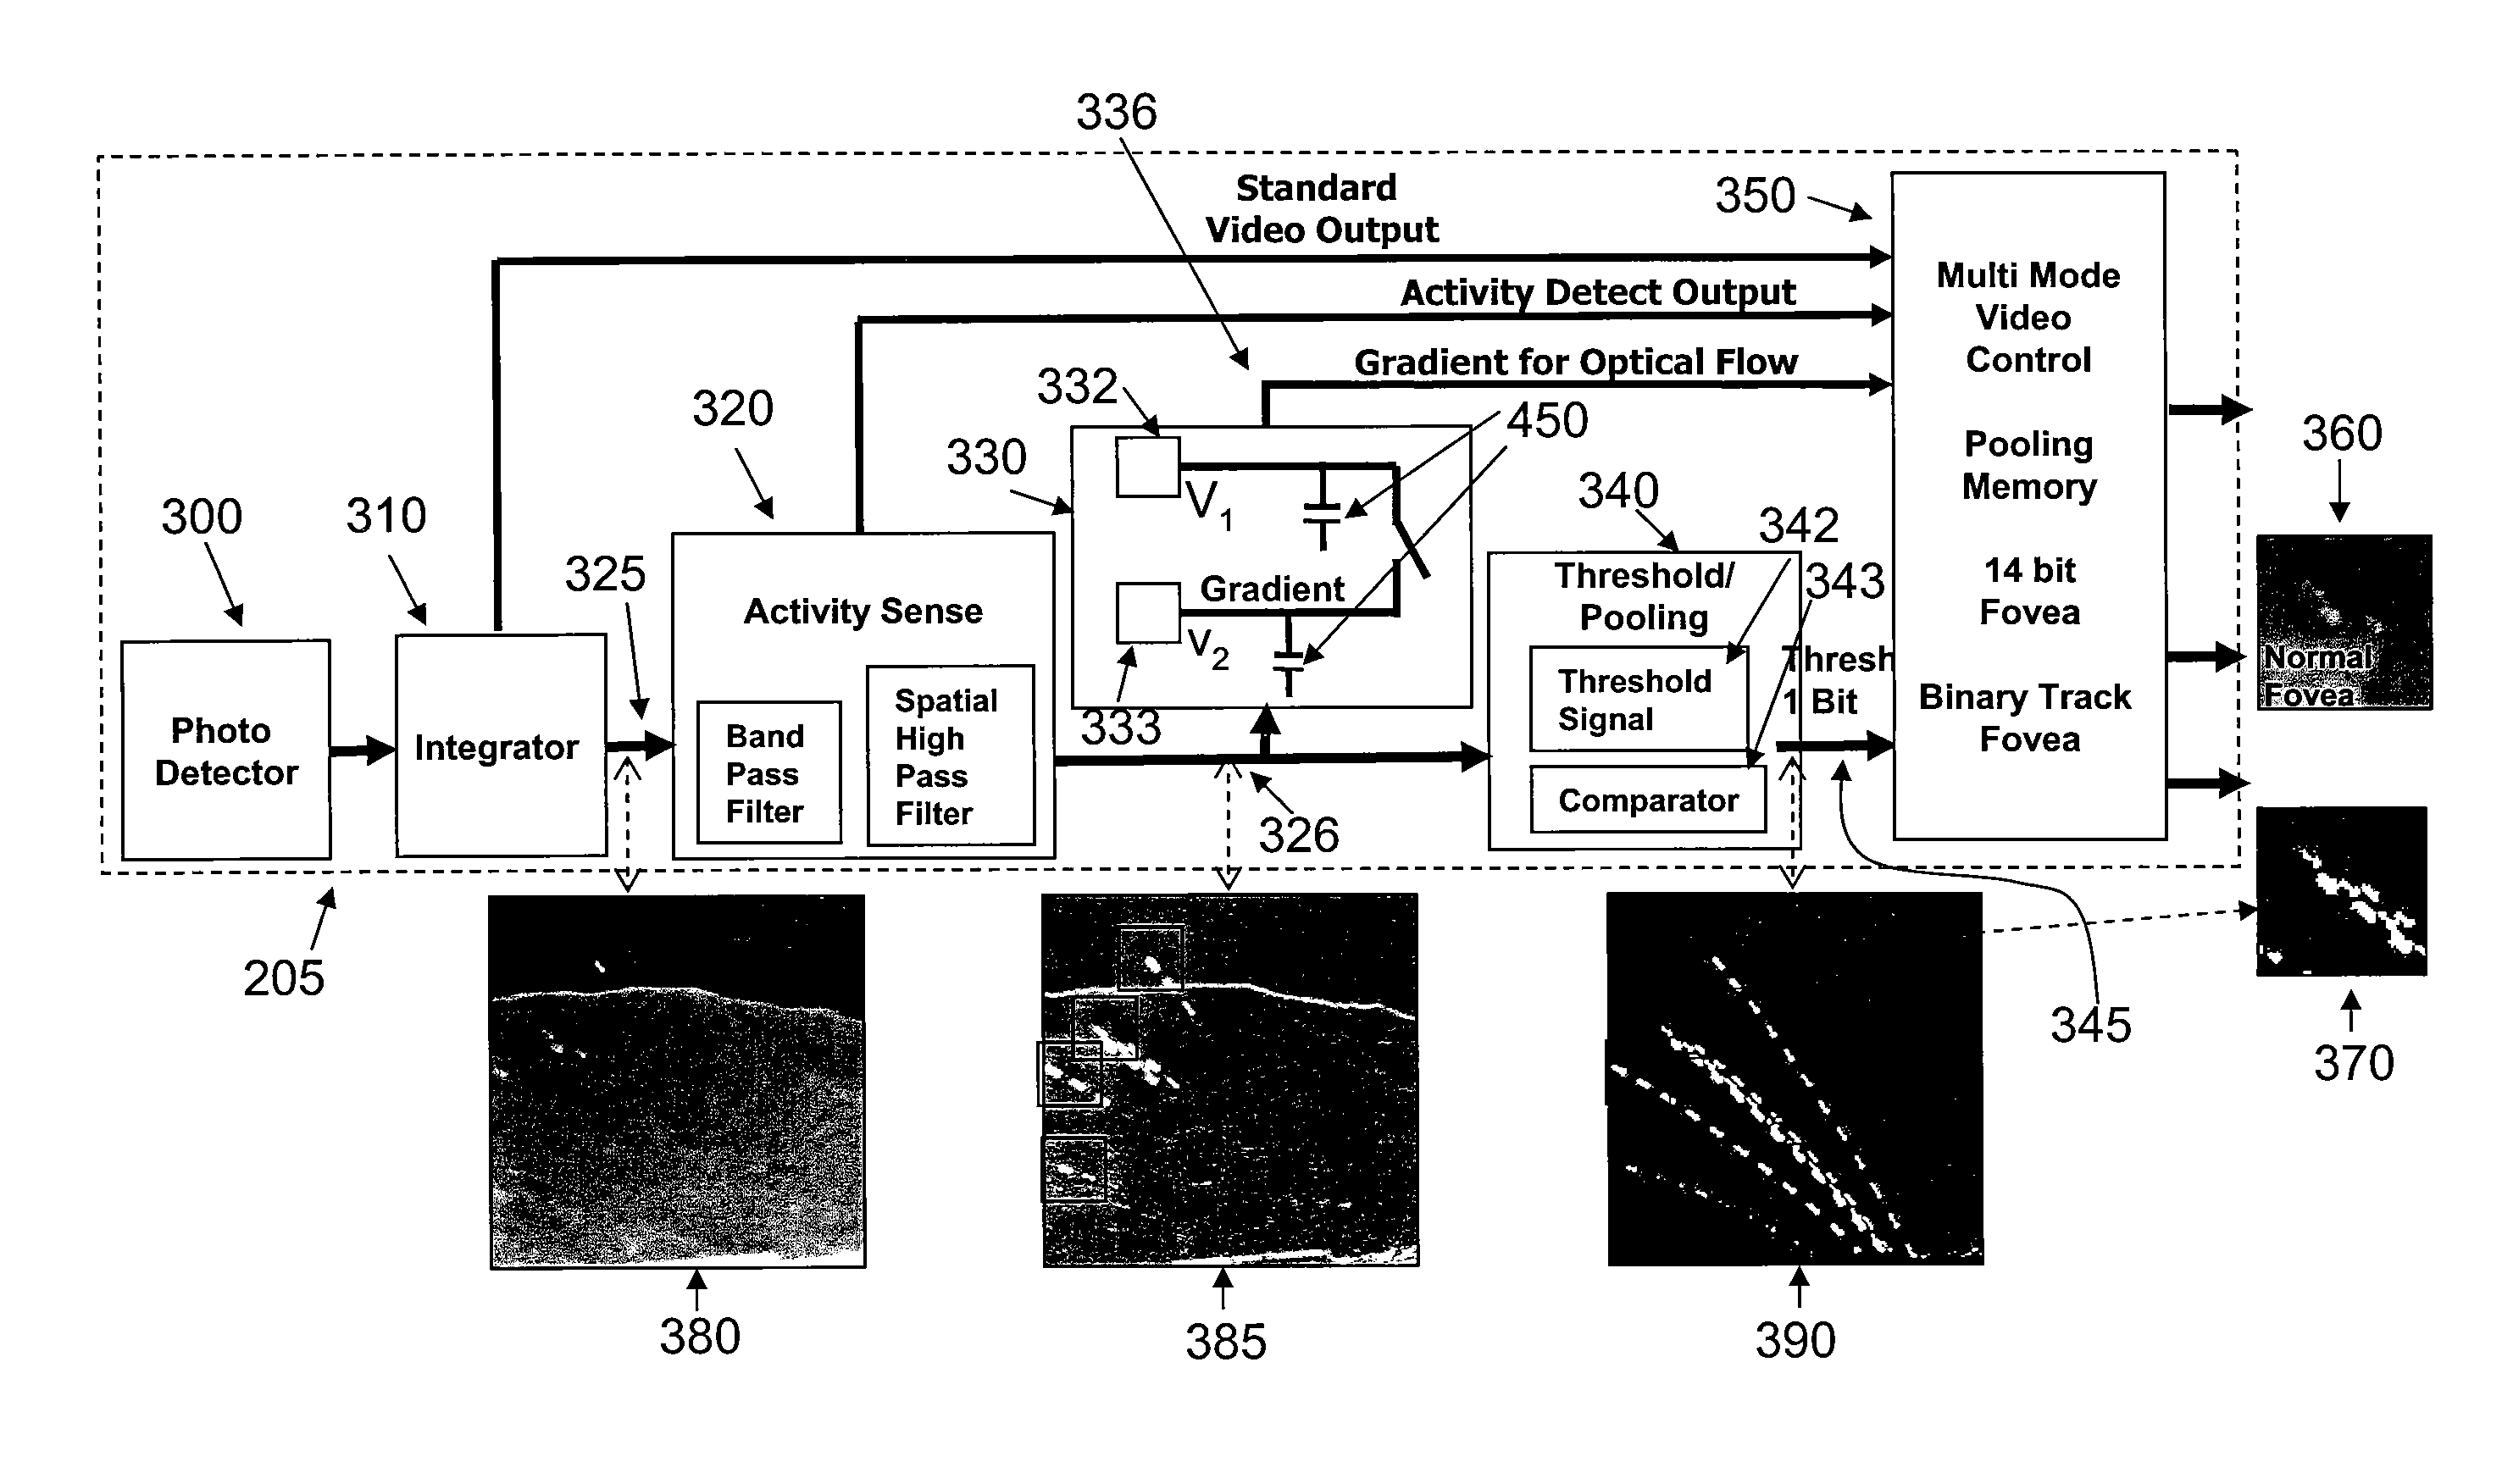 Imaging Detecting with Automated Sensing of an Object or Characteristic of that Object